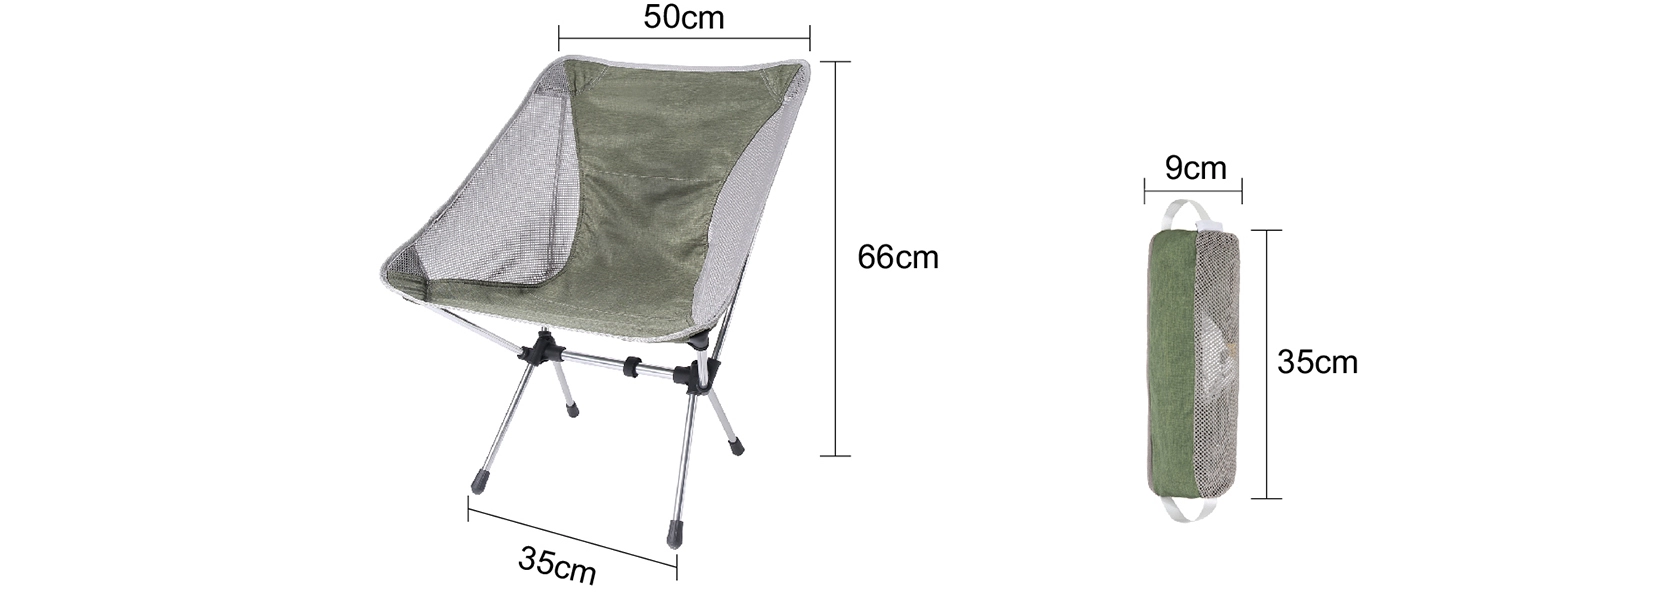 details of 600D Oxford Lightweight Foldable Aluminum portable camping Moon Chair for backpacking and hikking